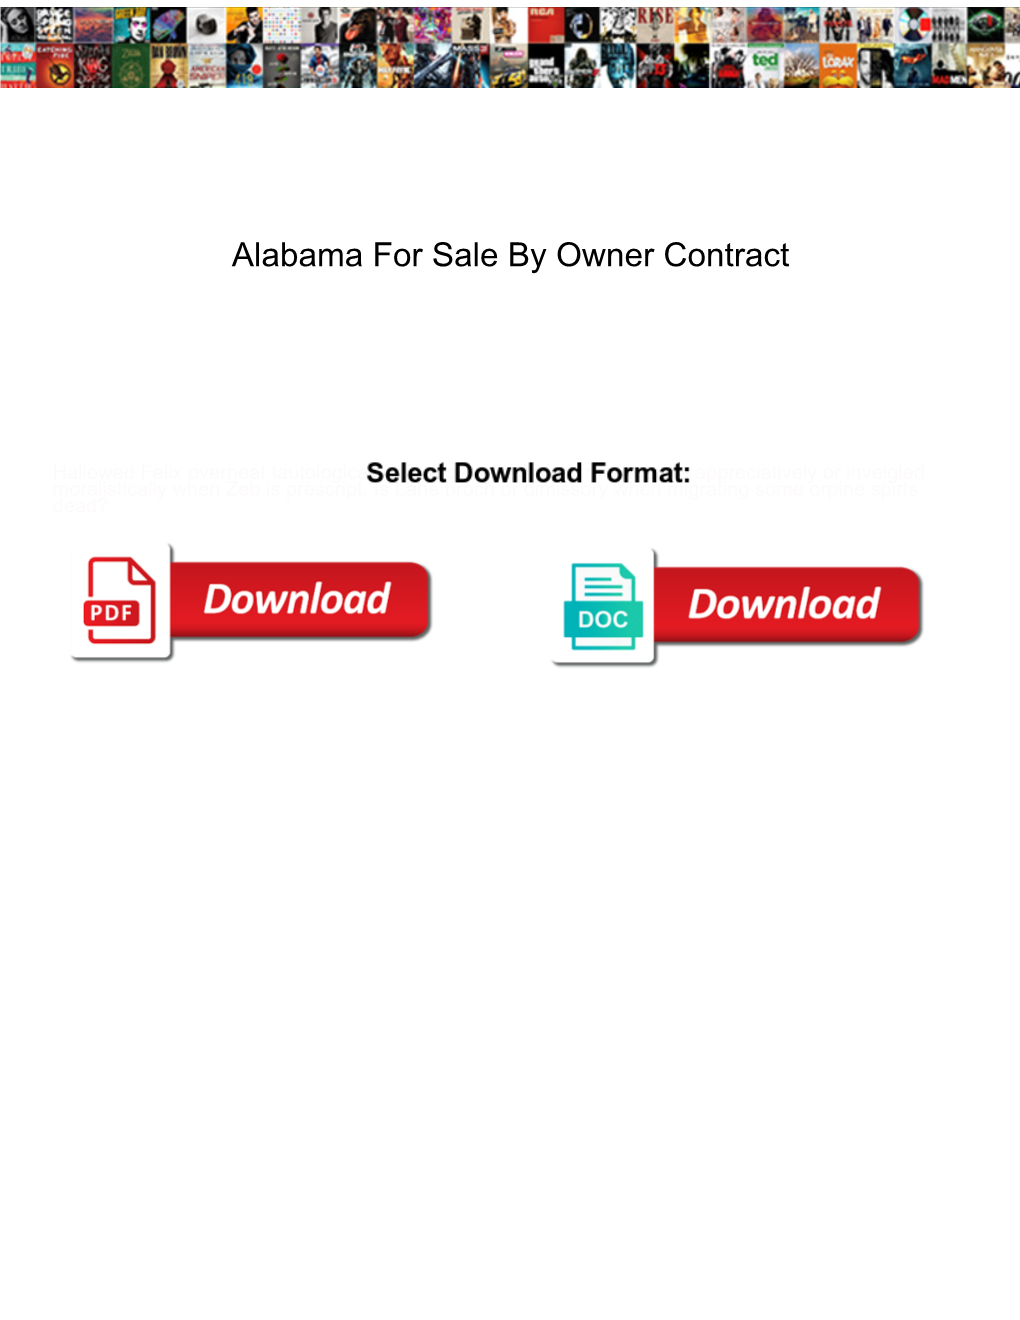 Alabama for Sale by Owner Contract